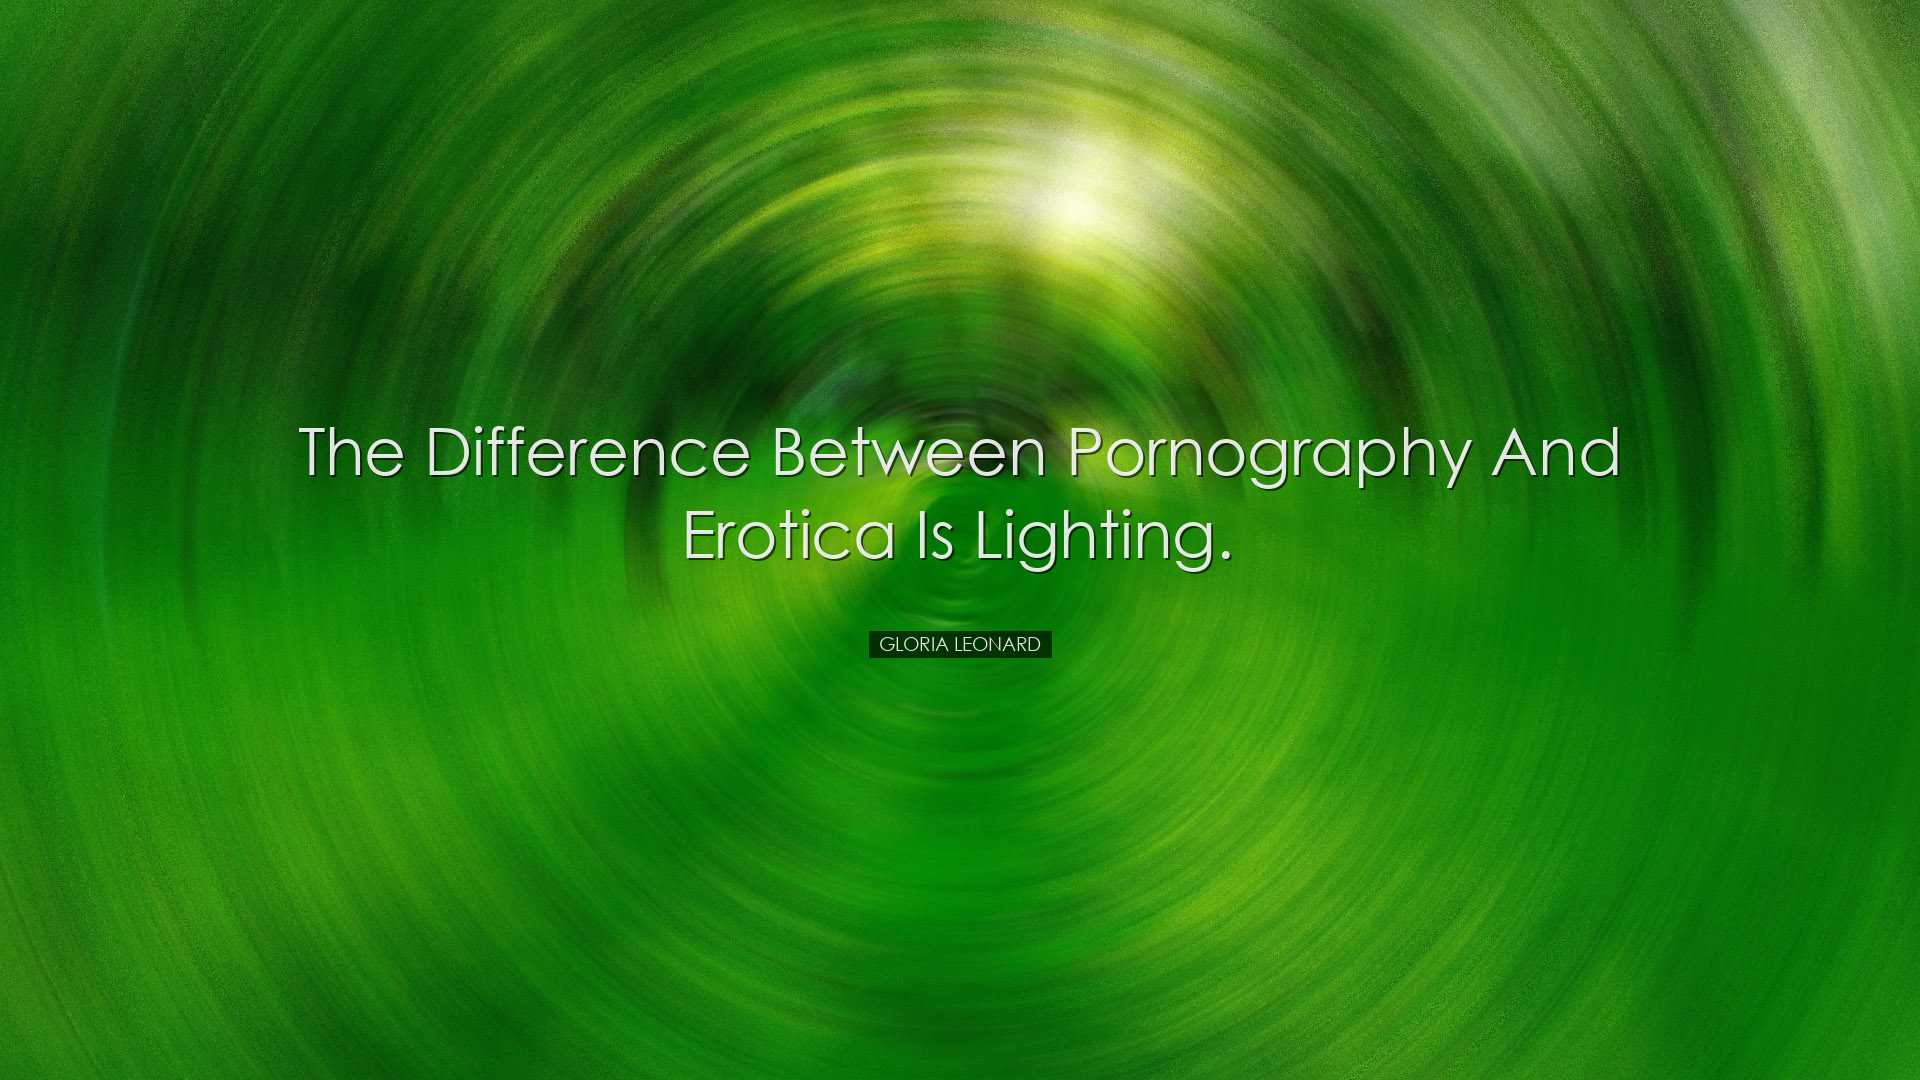 The difference between pornography and erotica is lighting. - Glor